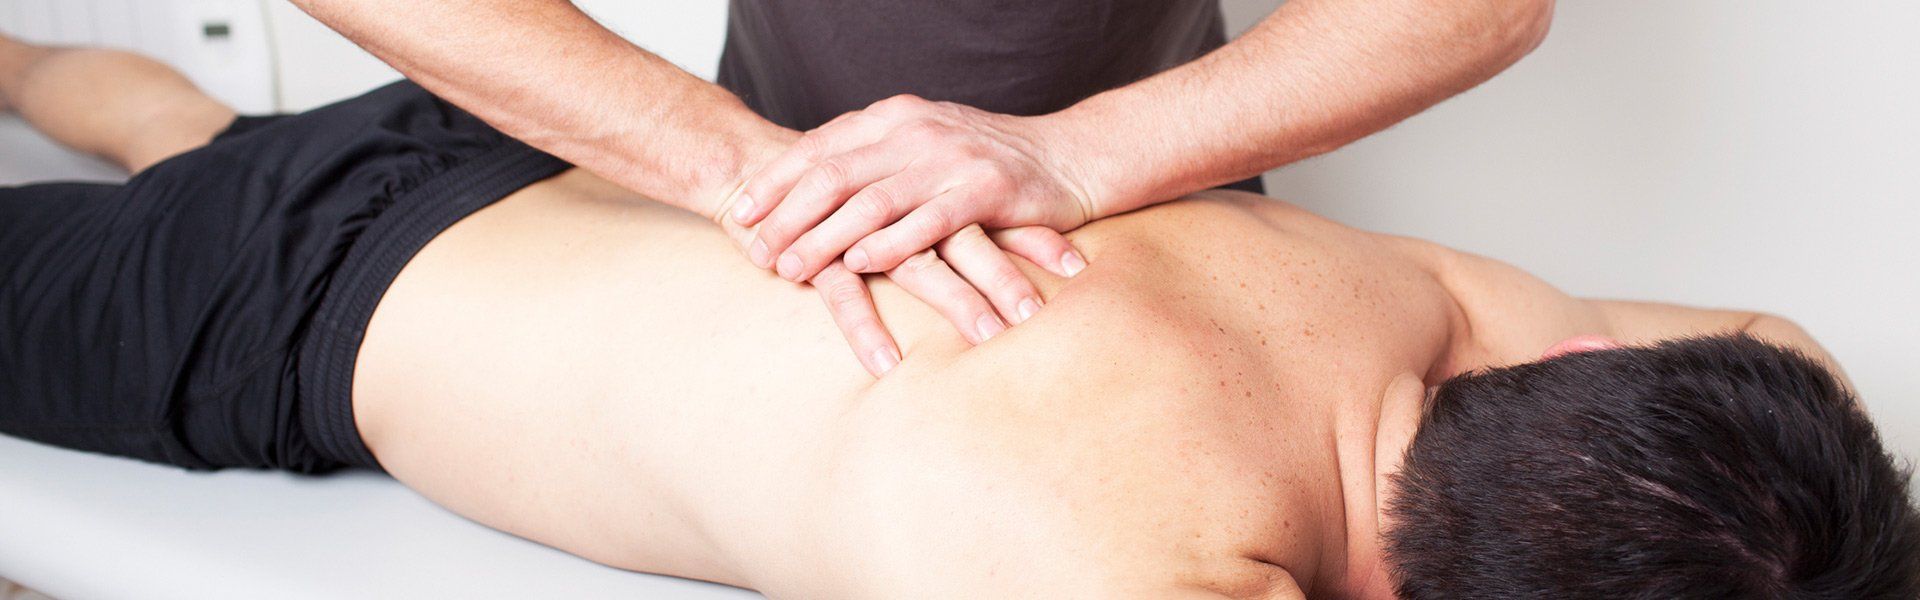 macquarie osteopaths man getting treatment for back